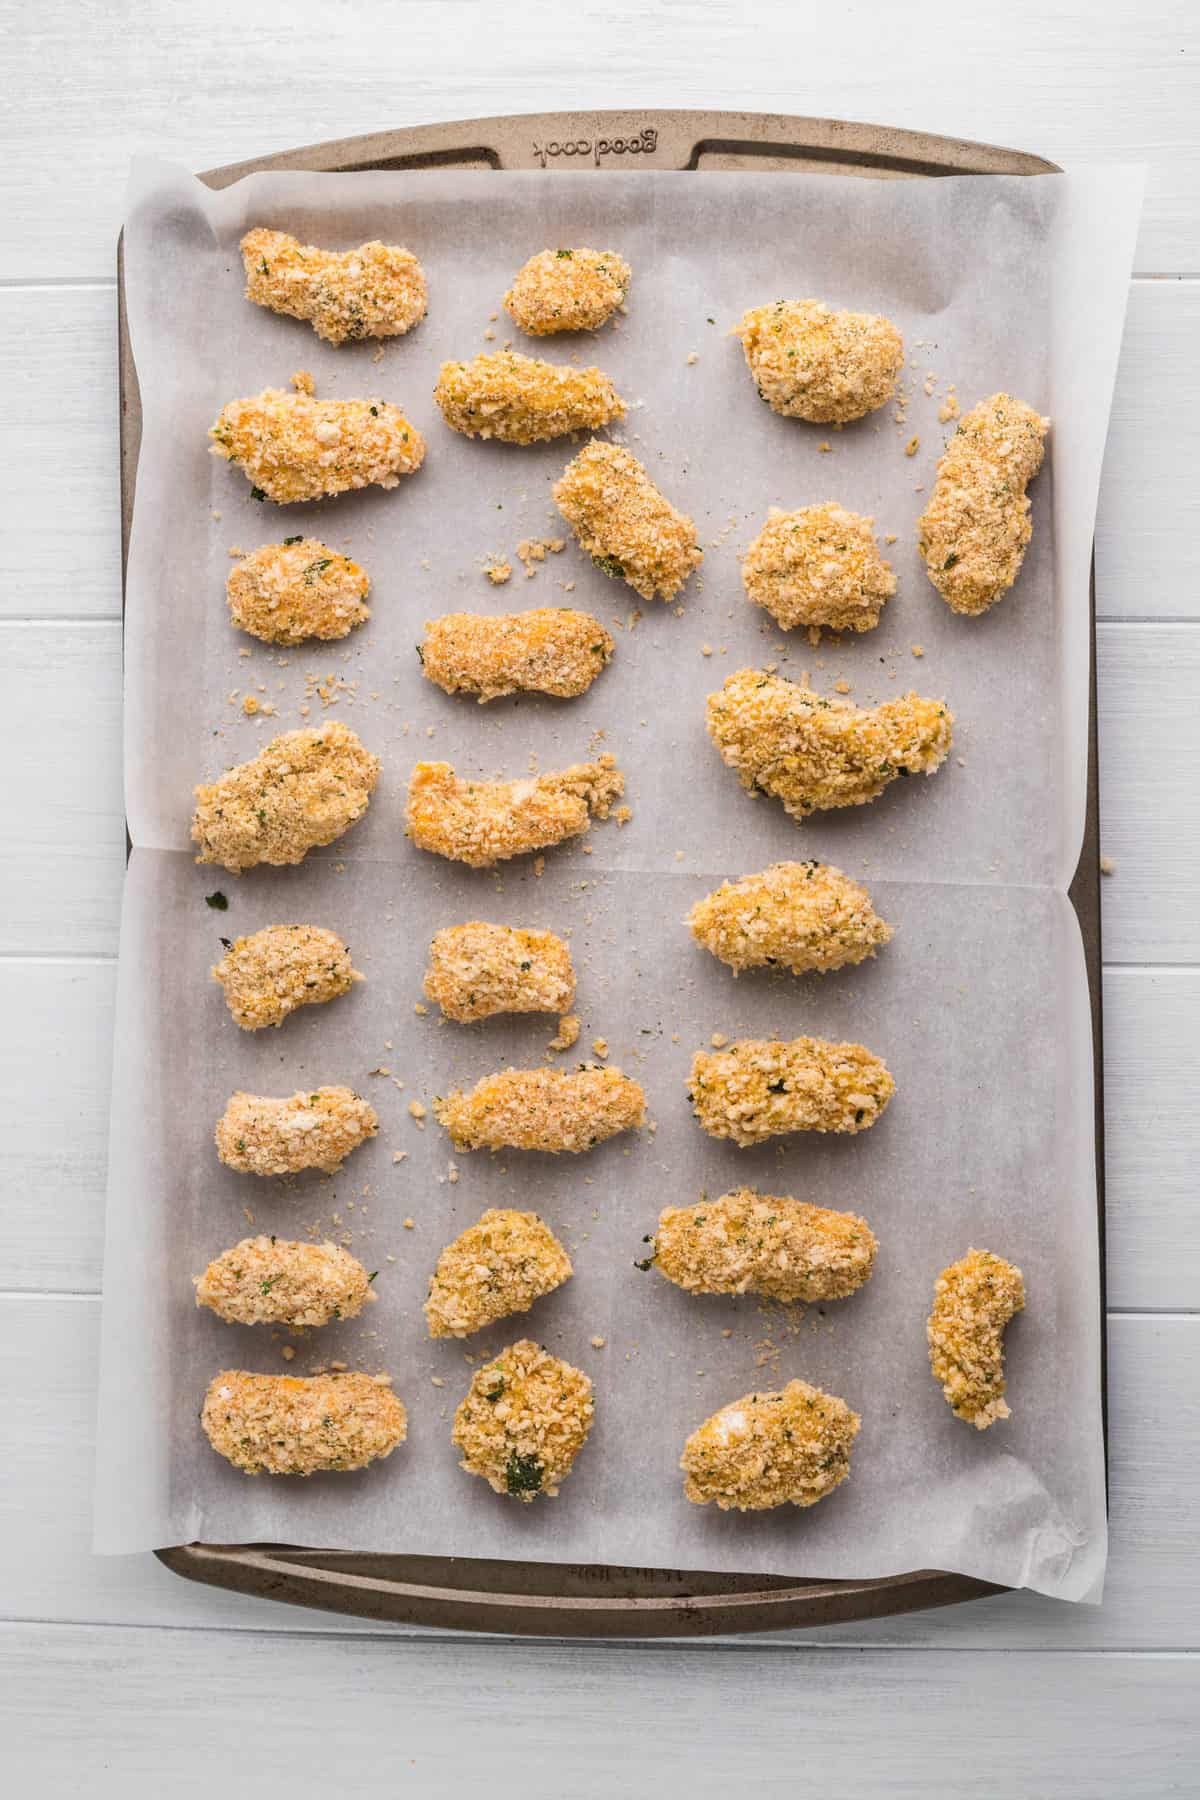 Top view of a baking sheet lined with parchment paper with breaded but uncooked Air Fryer Cheese Curds on it. 